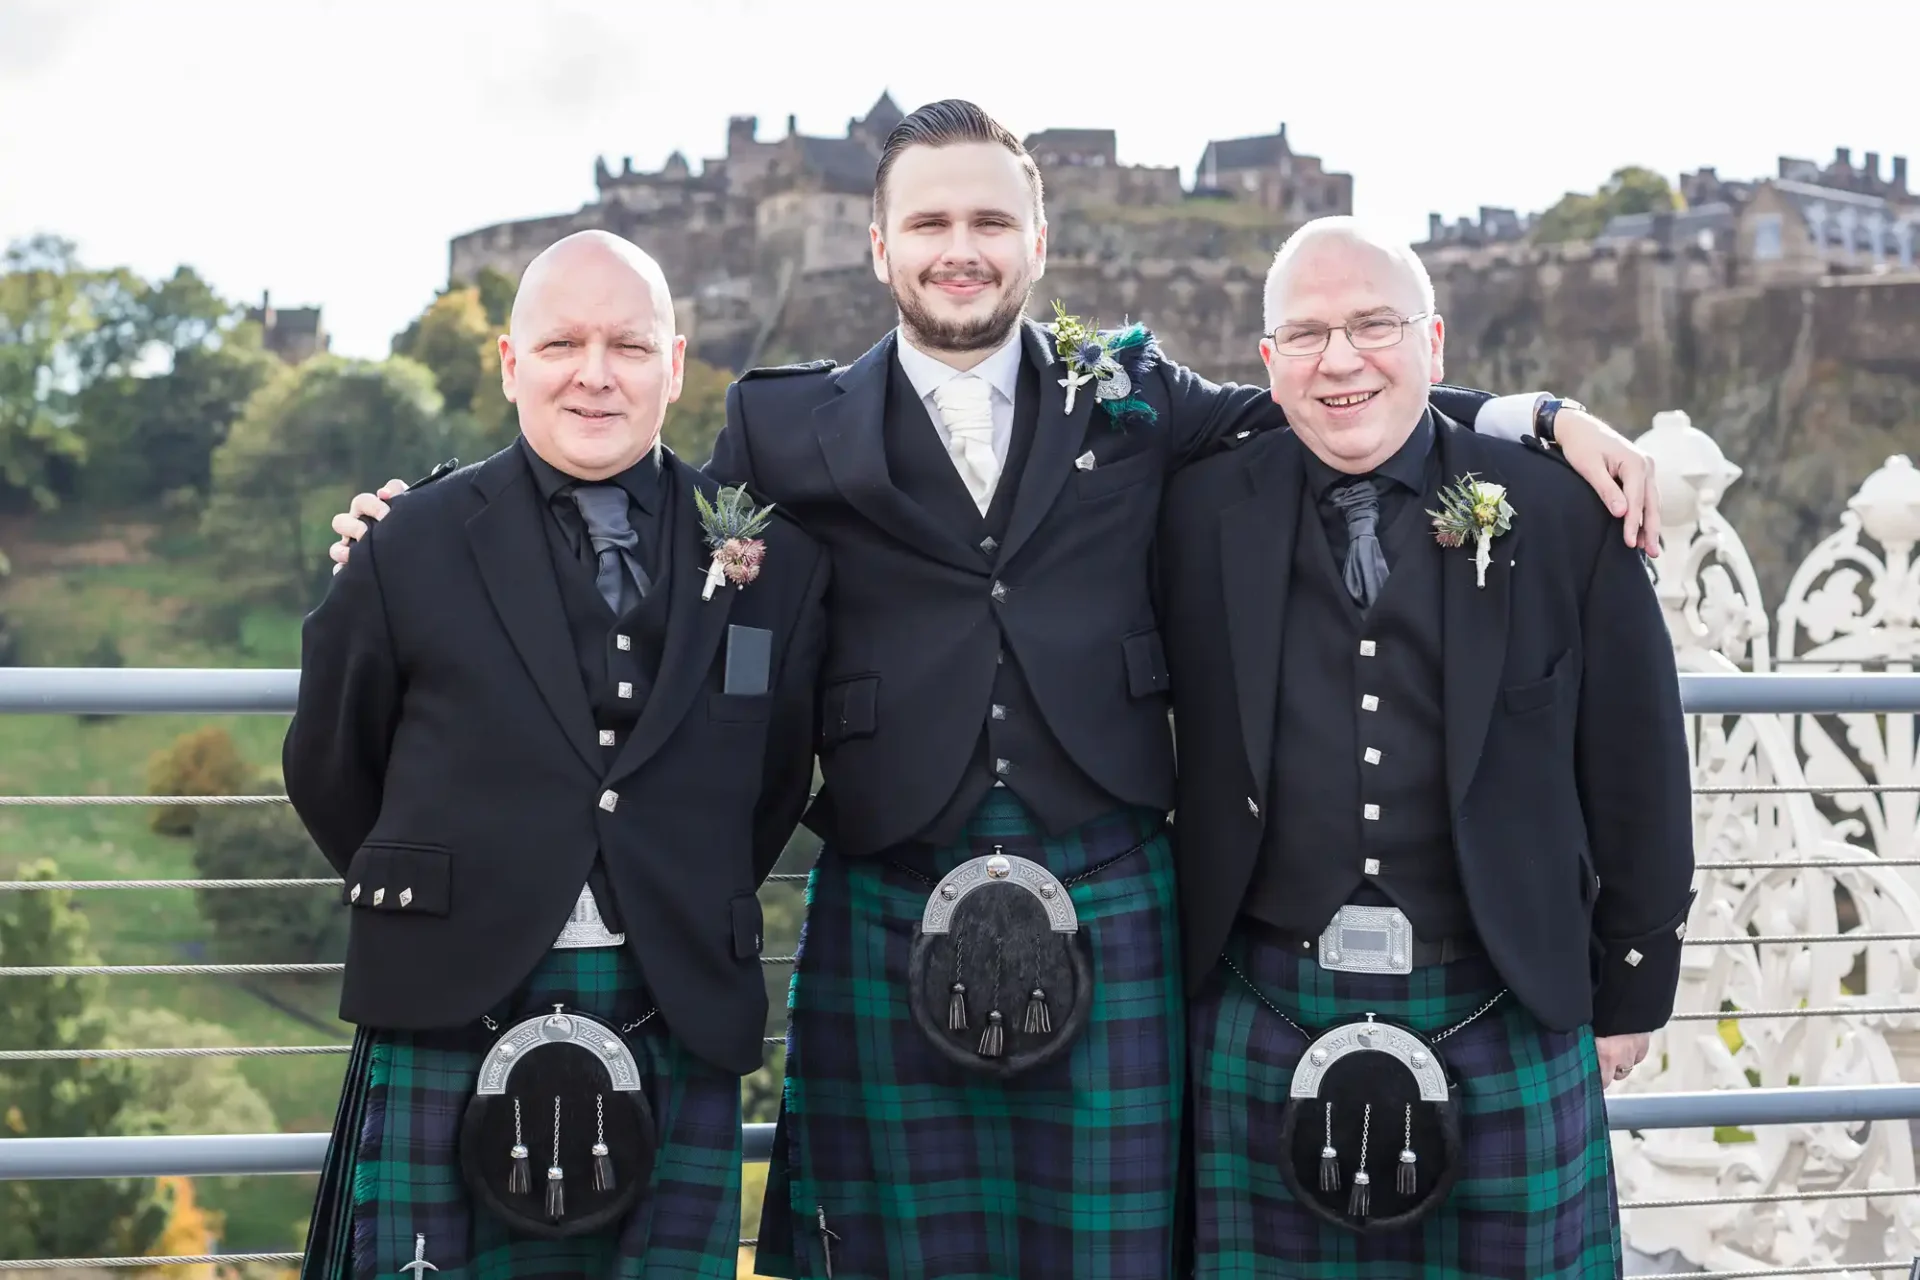 Three men in traditional scottish kilts posing together with edinburgh castle in the background.